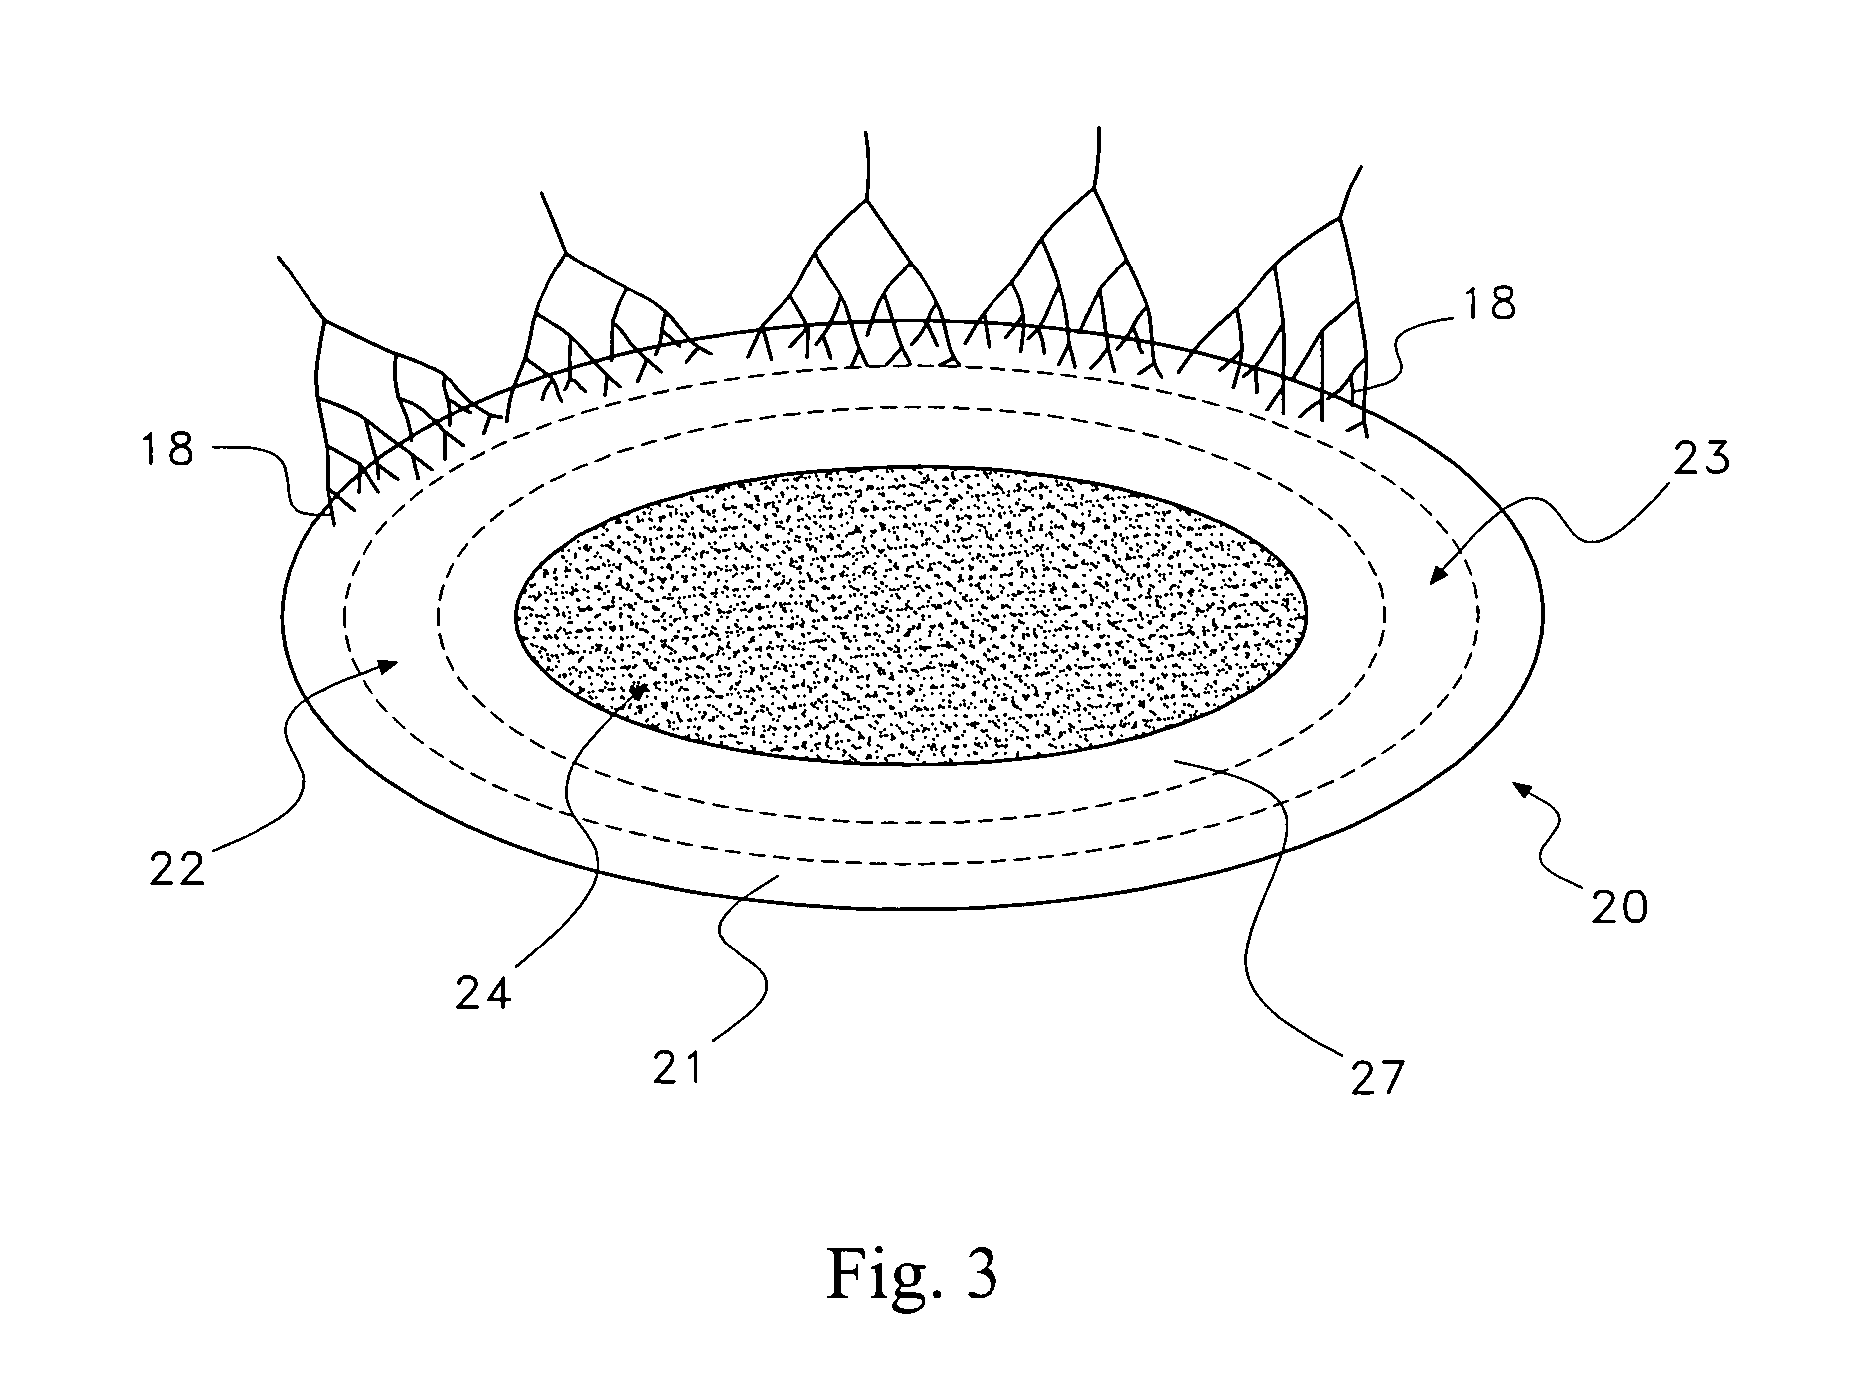 Pharmaceutical removal of vascular extensions from a degenerating disc